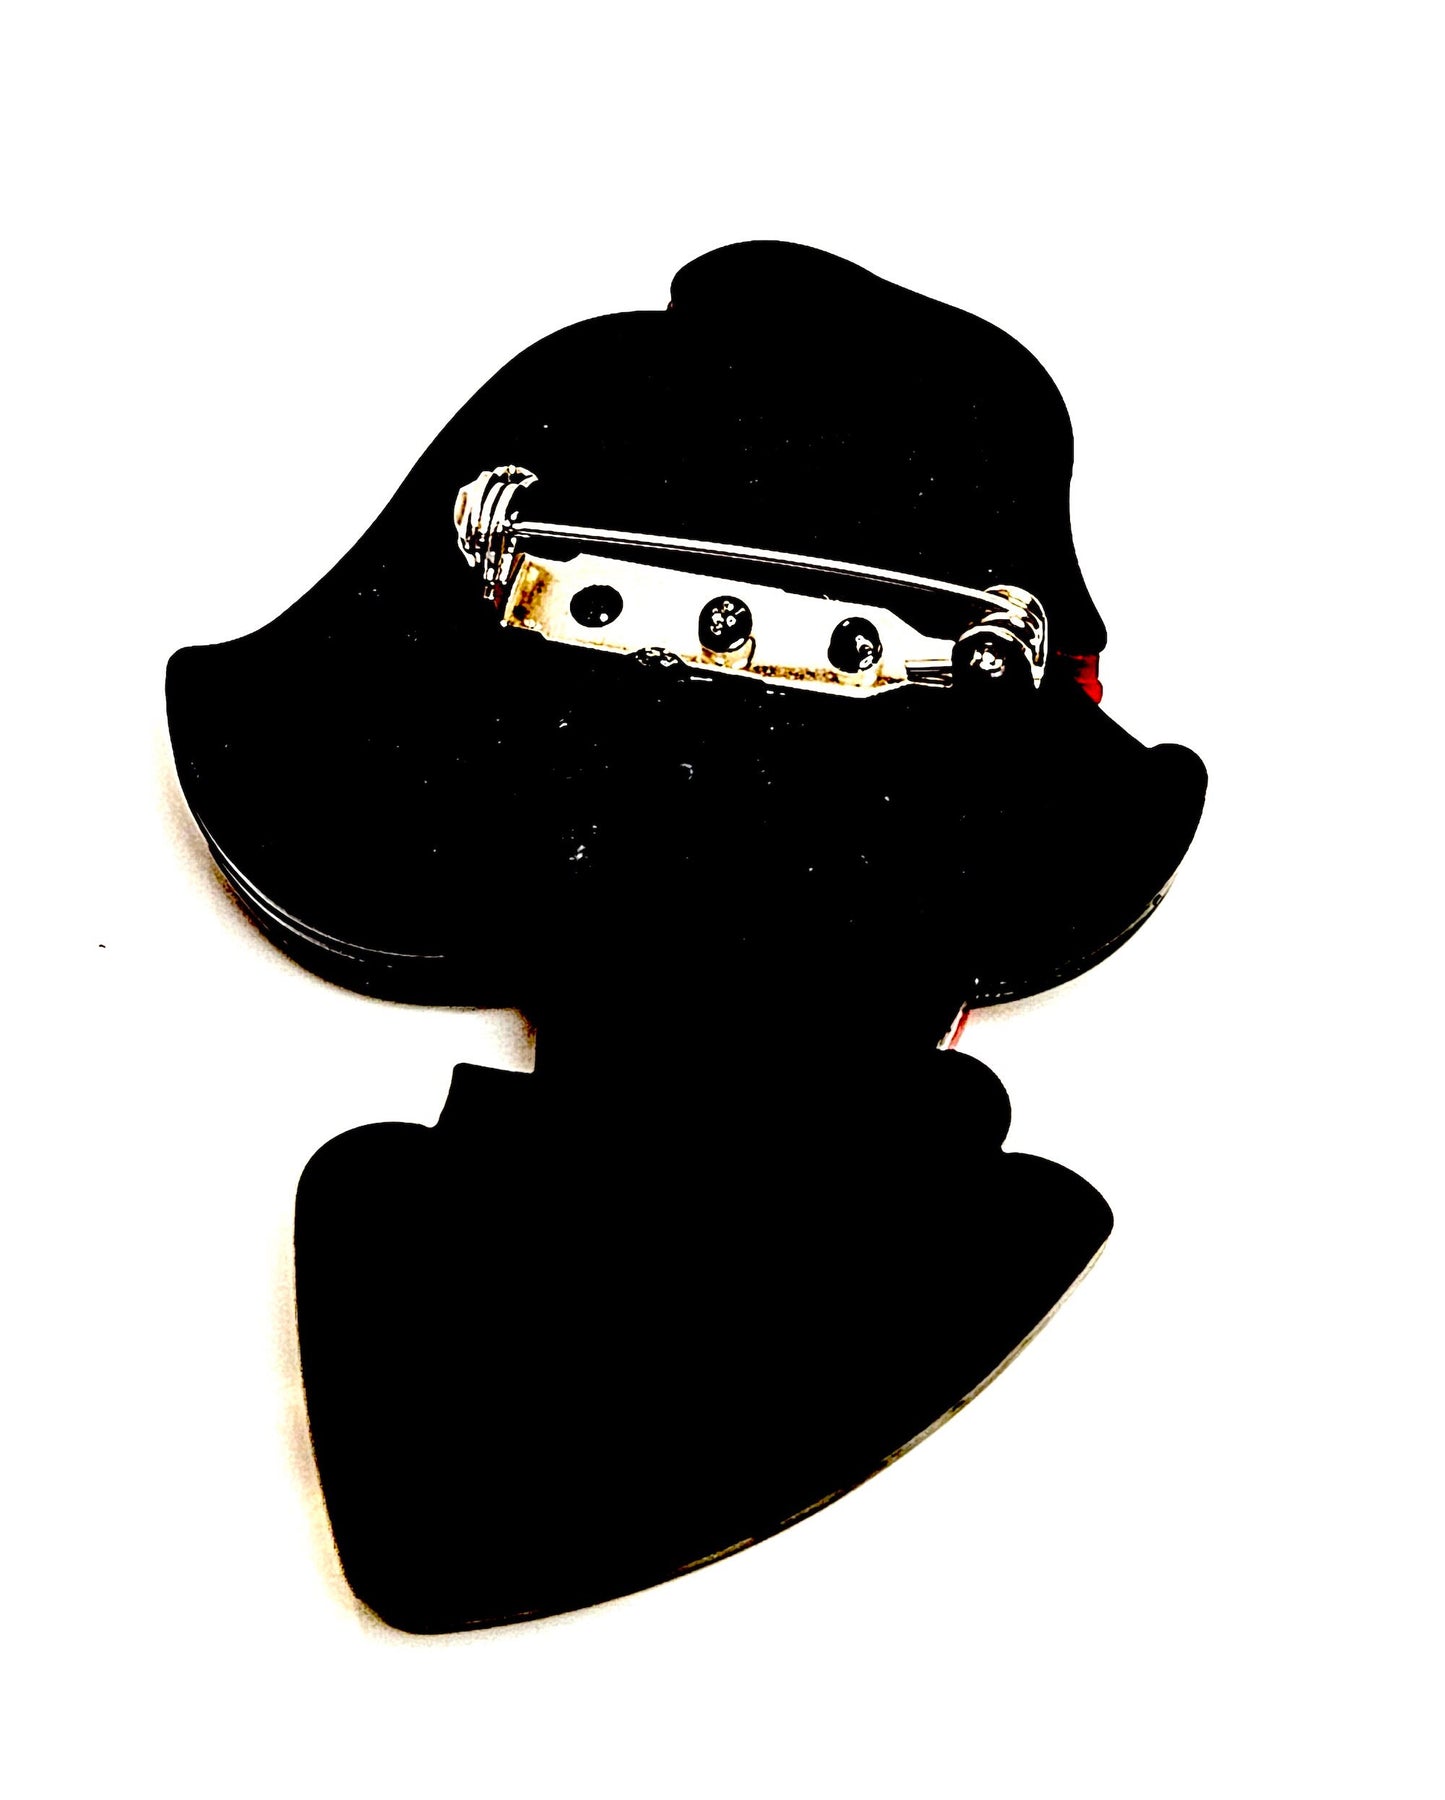 Fun French Style Lady Brooch, Lady in Glasses with a Scarf and Bolero, Fashion Pin for Jacket Scarf, Paris Lady Pin, Brooches For Women